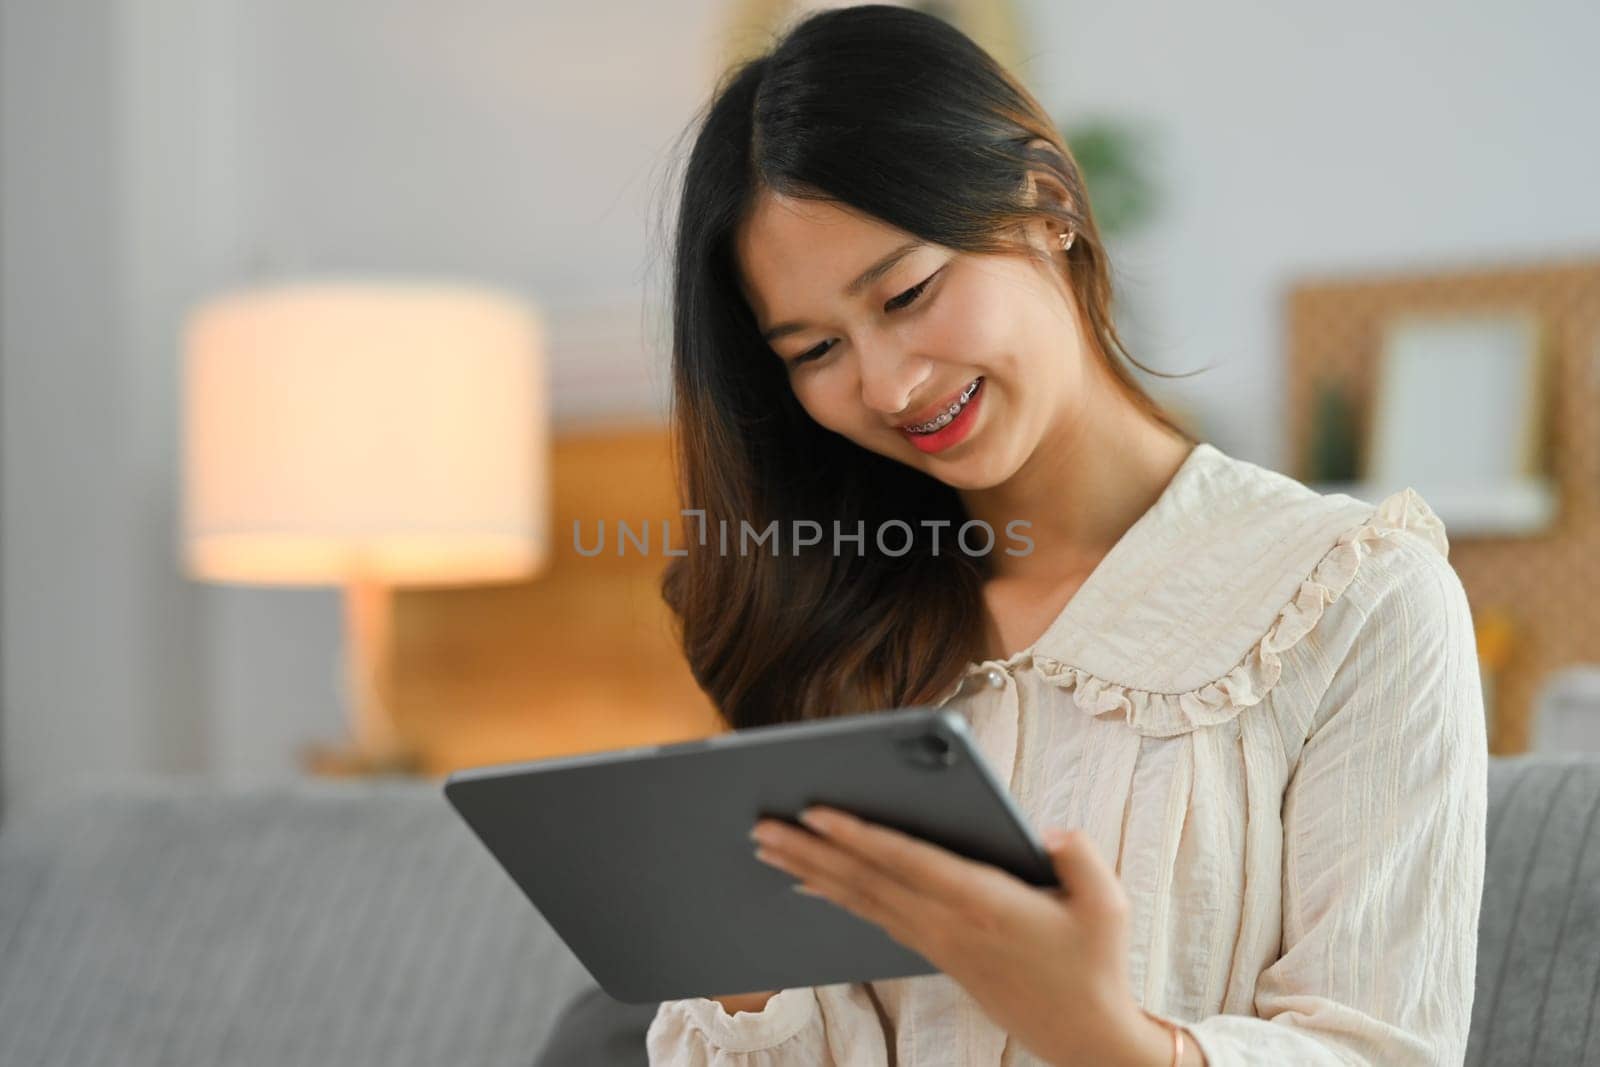 Cheerful young woman using digital tablet on couch, surfing the net or shopping online by prathanchorruangsak